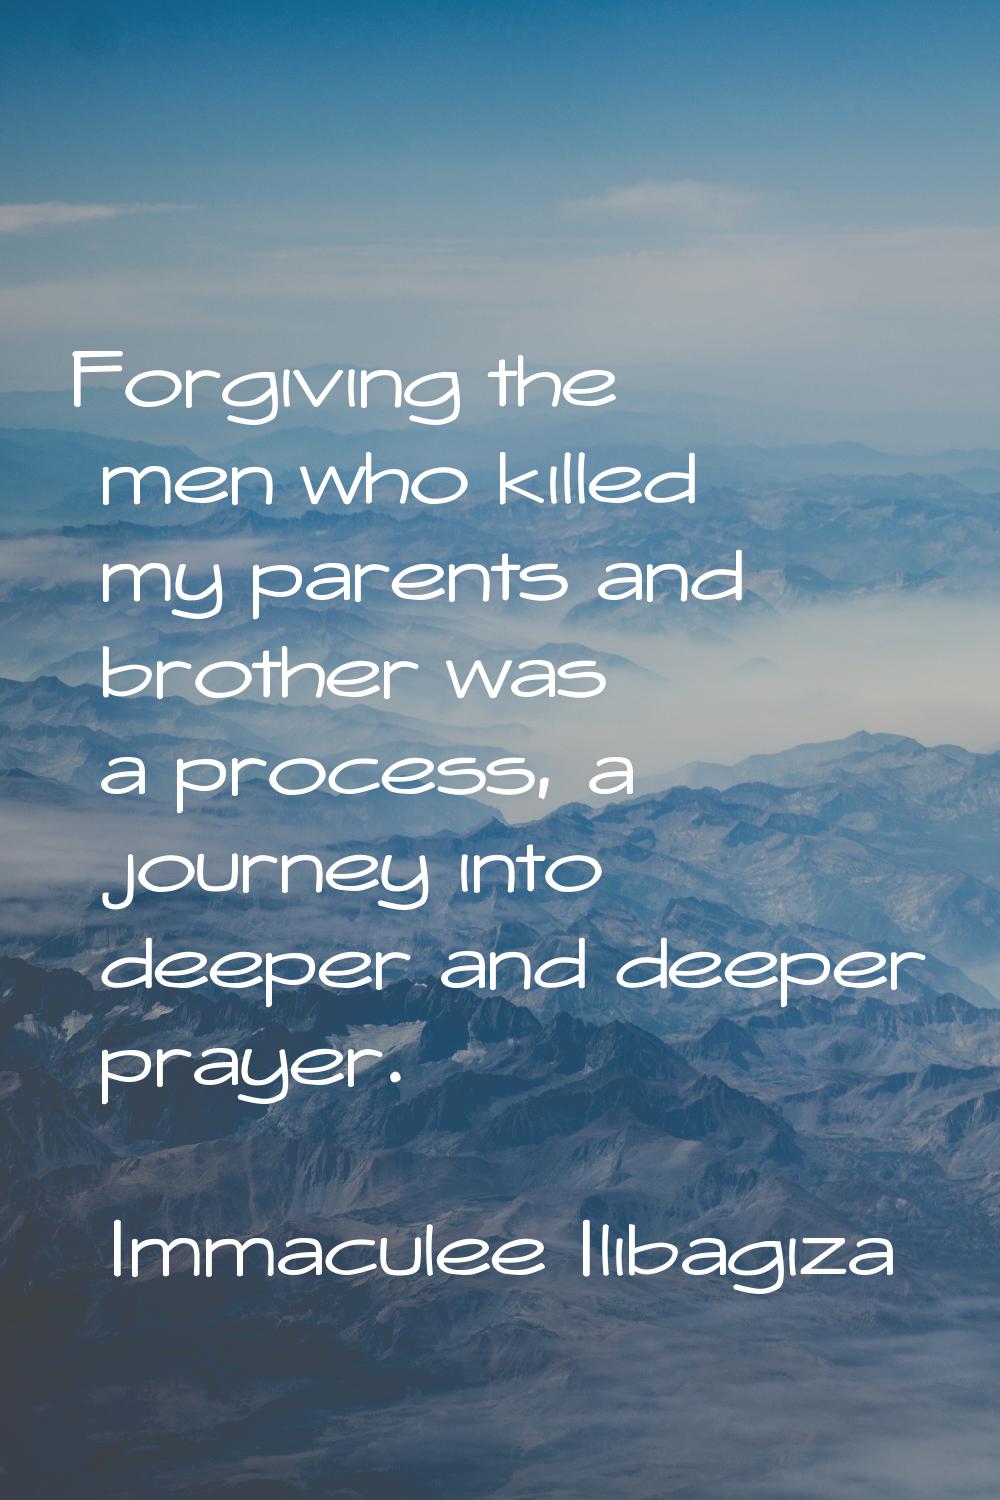 Forgiving the men who killed my parents and brother was a process, a journey into deeper and deeper